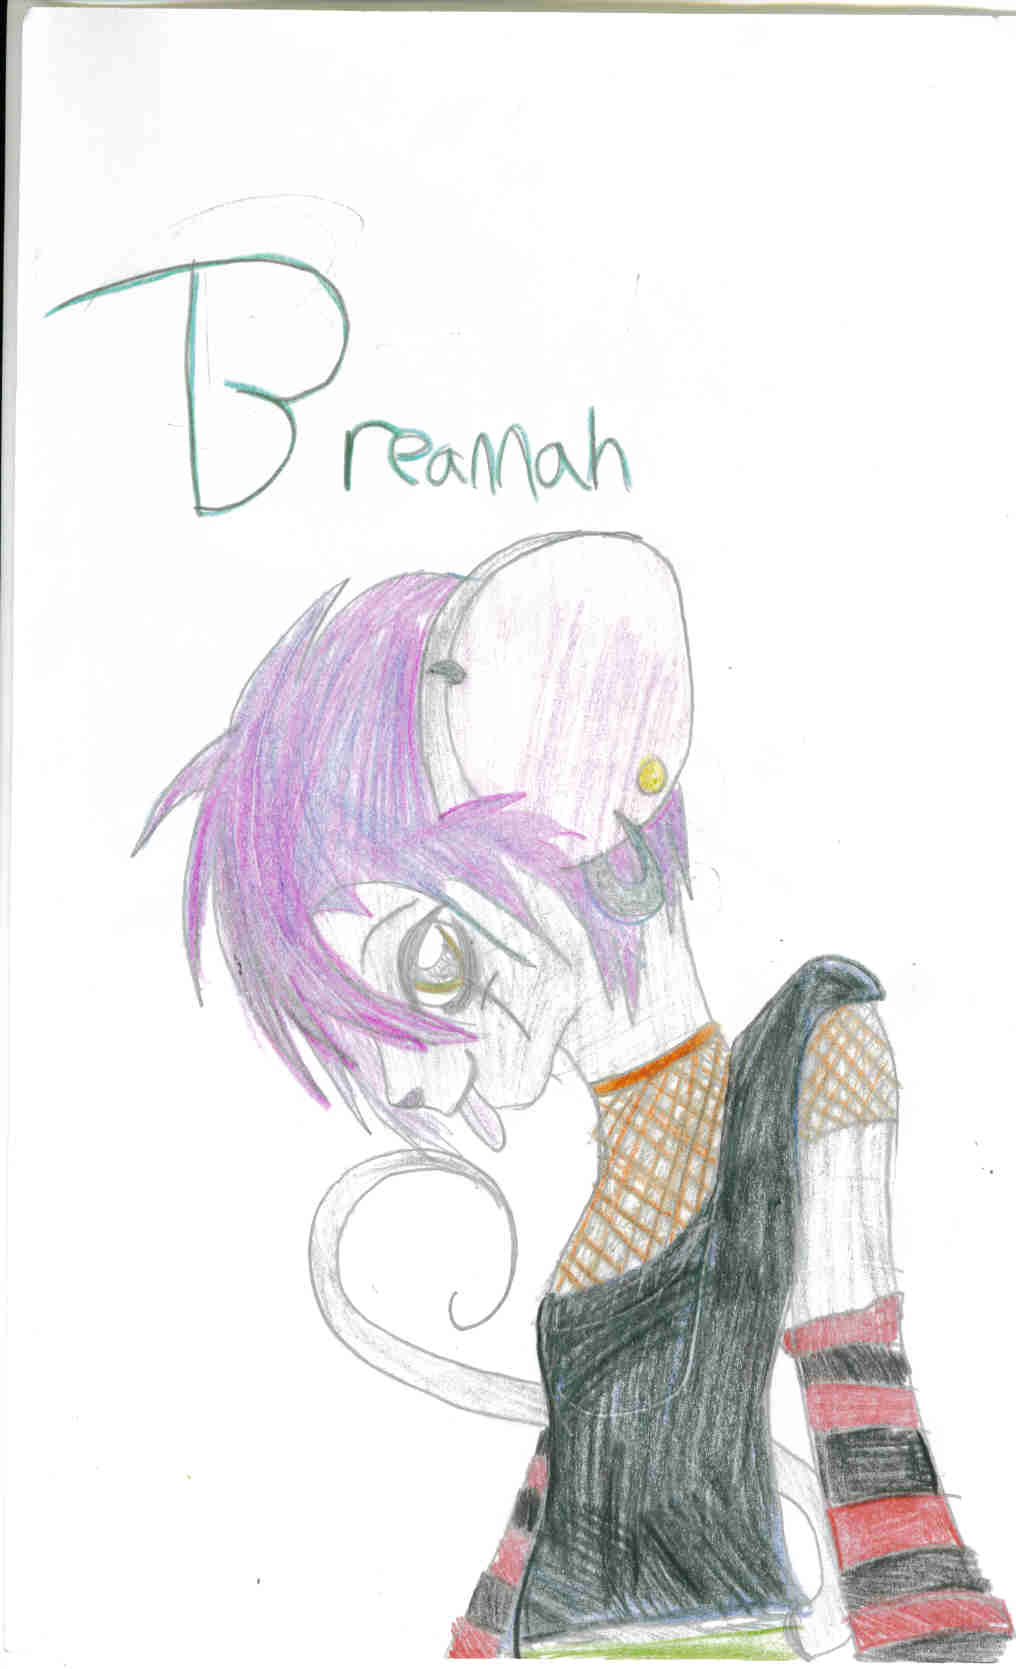 My friend Breannah as a mousie!!! X3 by Weevil_Underwood